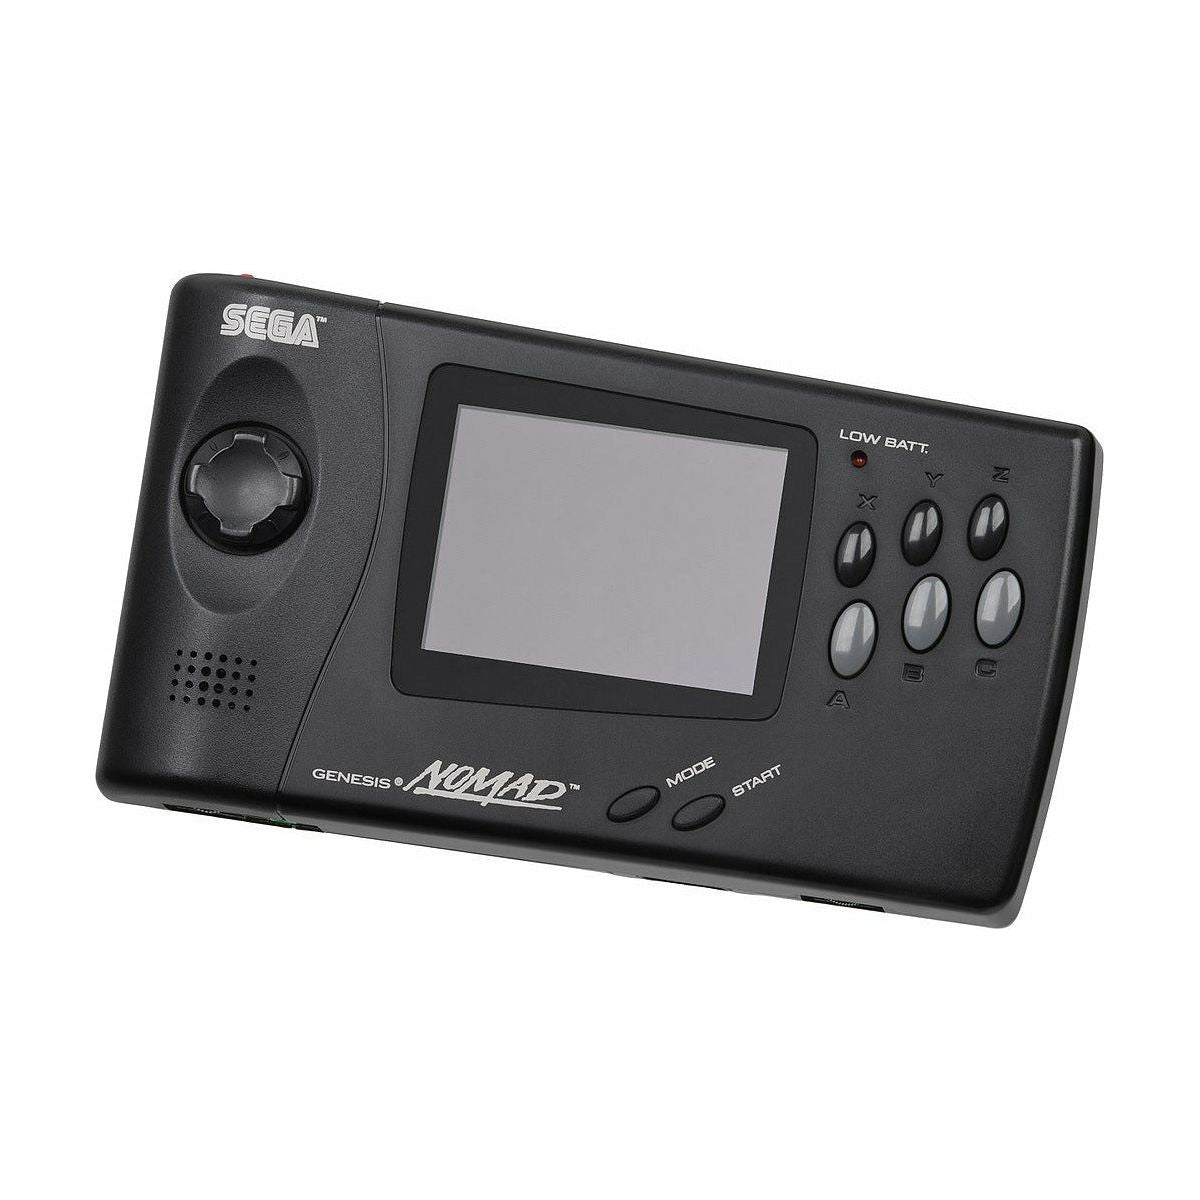 Sega Nomad System with New Capacitors & Minor LCD Damage